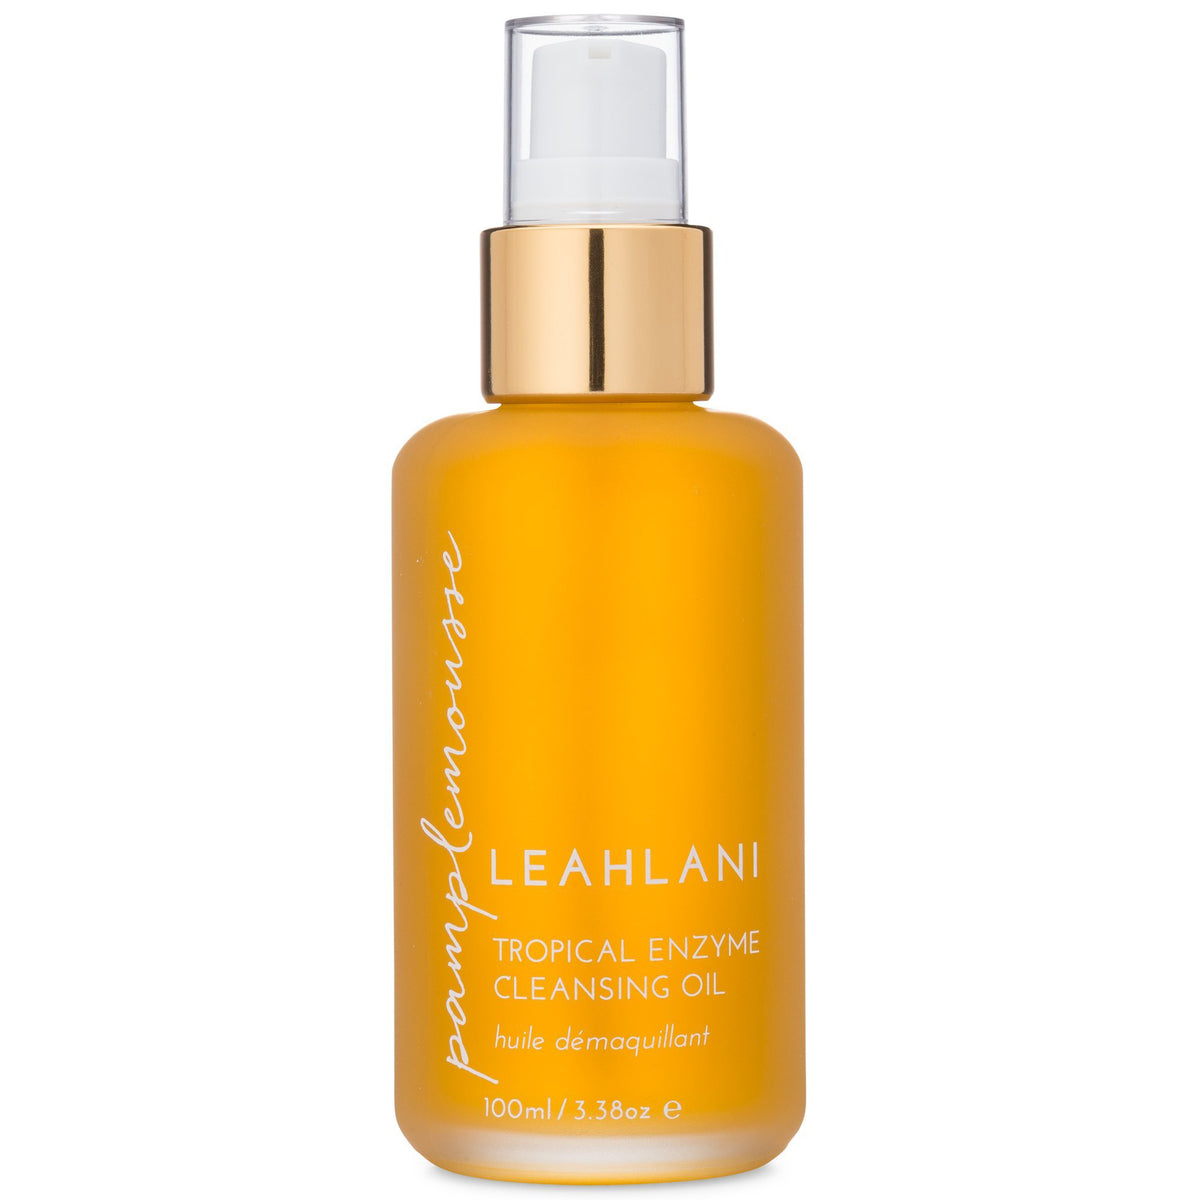 Pamplemousse Cleansing Oil - Brightening Enzyme Cleanser